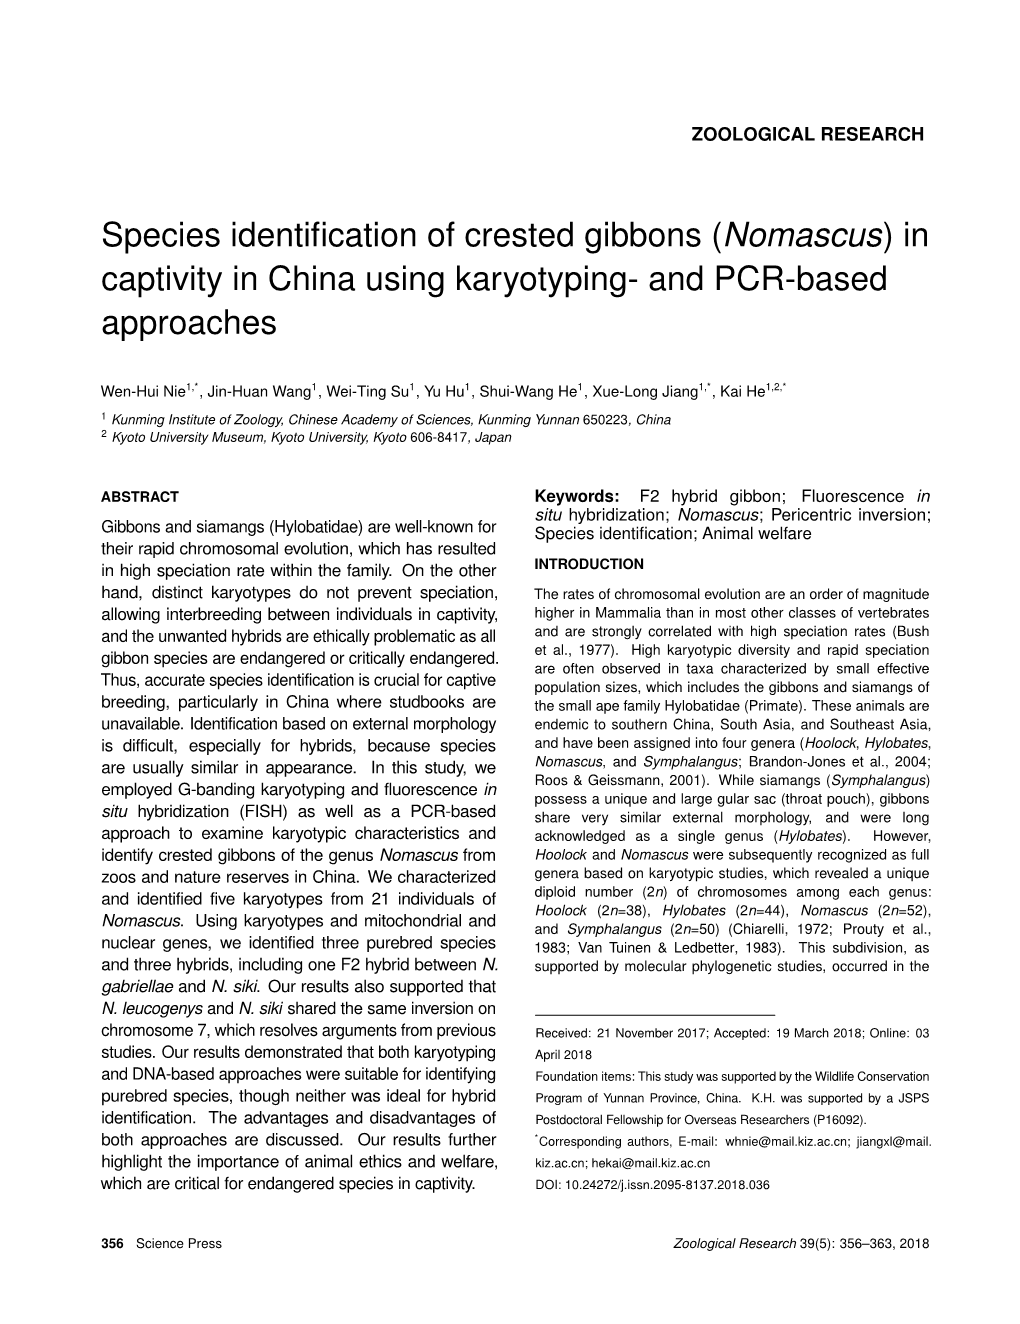 Species Identification of Crested Gibbons (Nomascus) in Captivity In